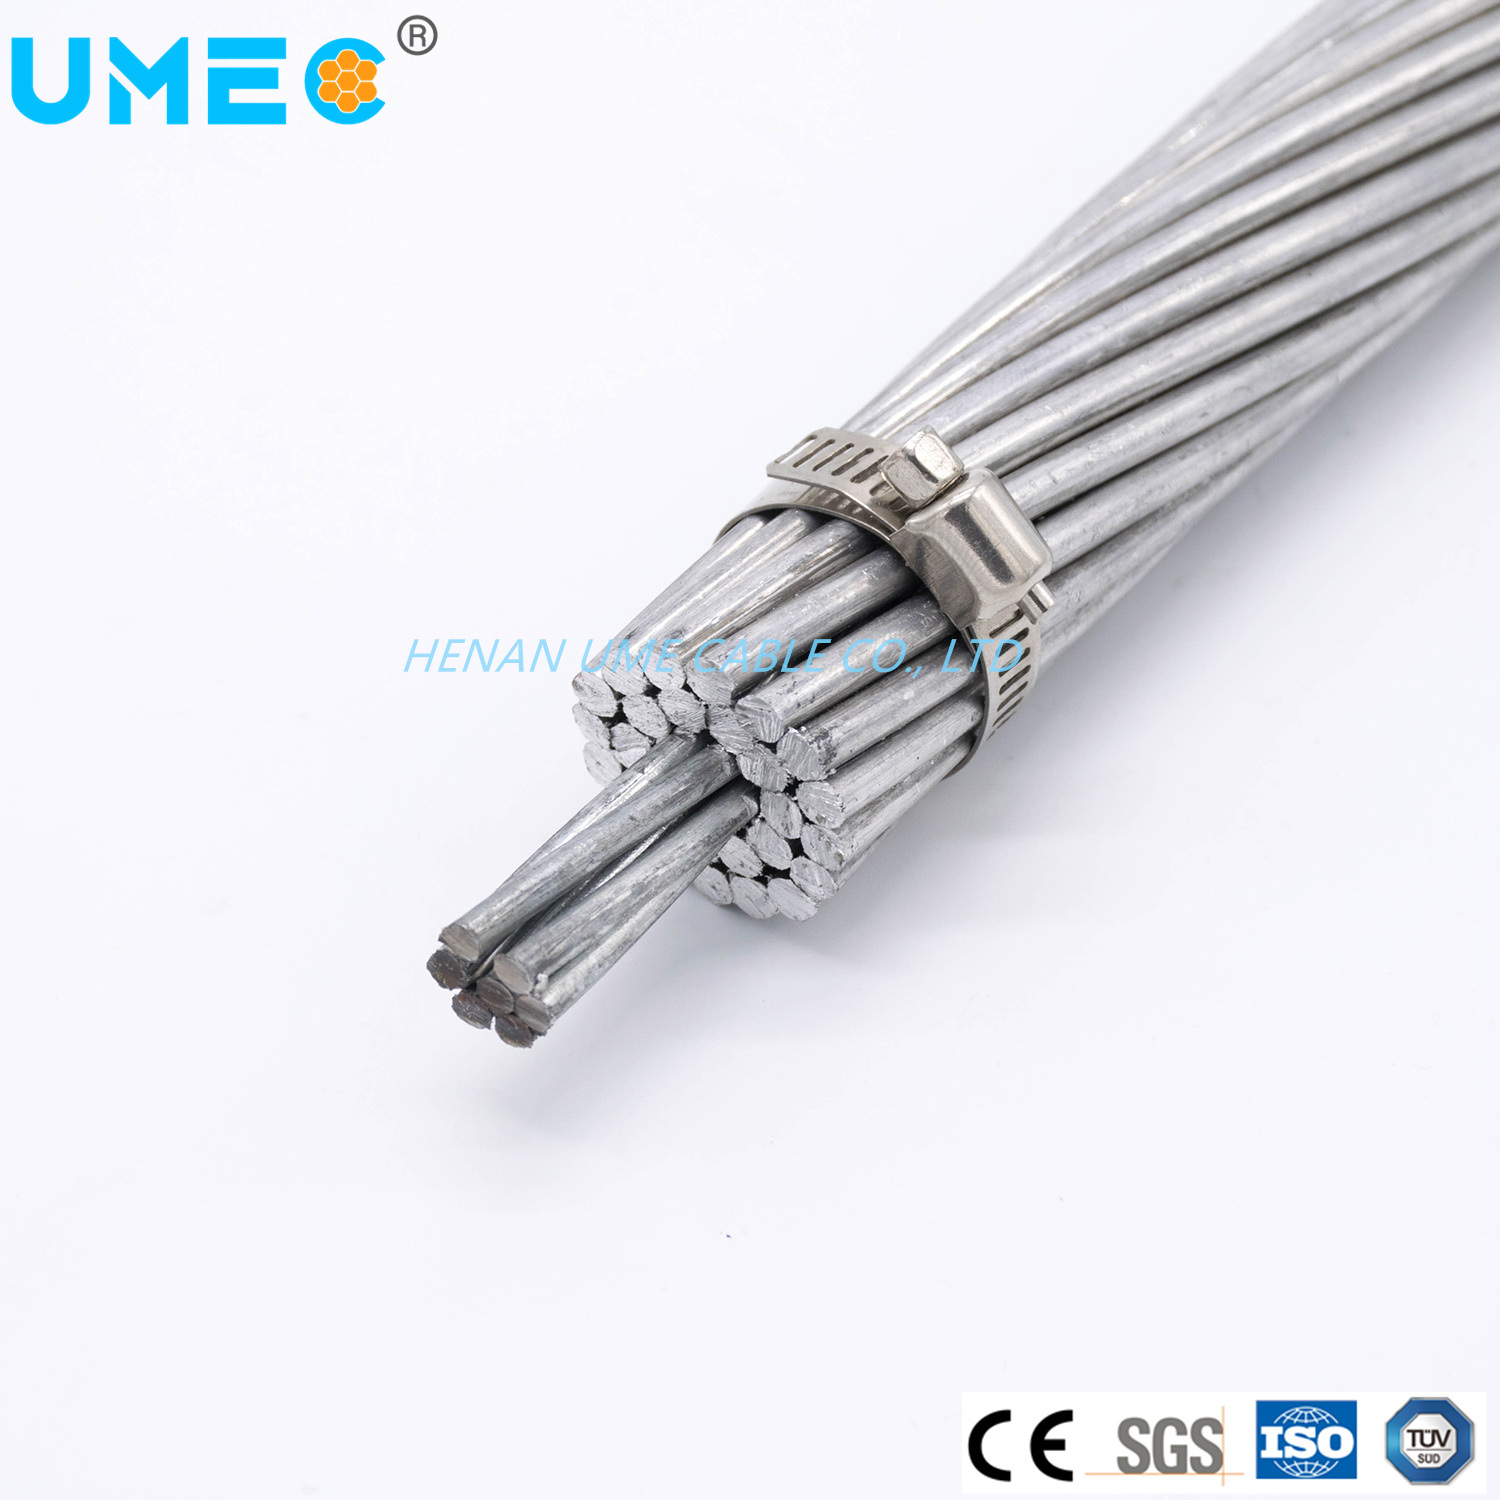 Electric Conductor Aluminum Conductor Steel Reinforced ACSR Cable 95/15 Bare Conductor Electrical Cable